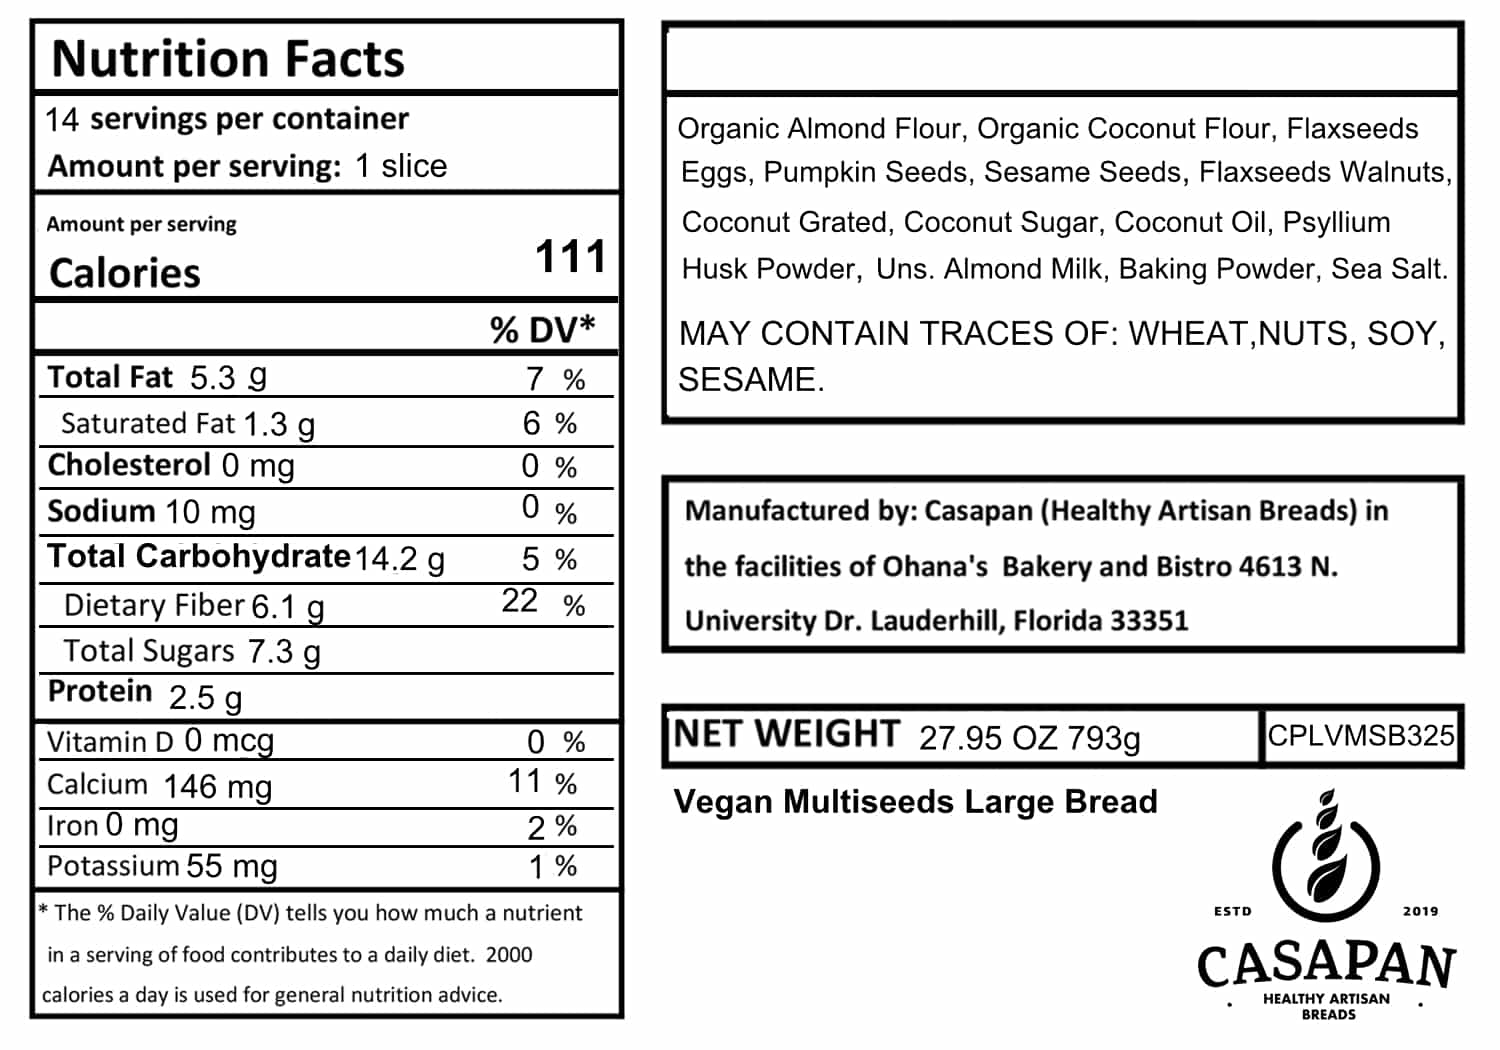 CPLVMSB325 VEGAN MULTISEEDS LARGE BREAD NUTRITION–FACTS